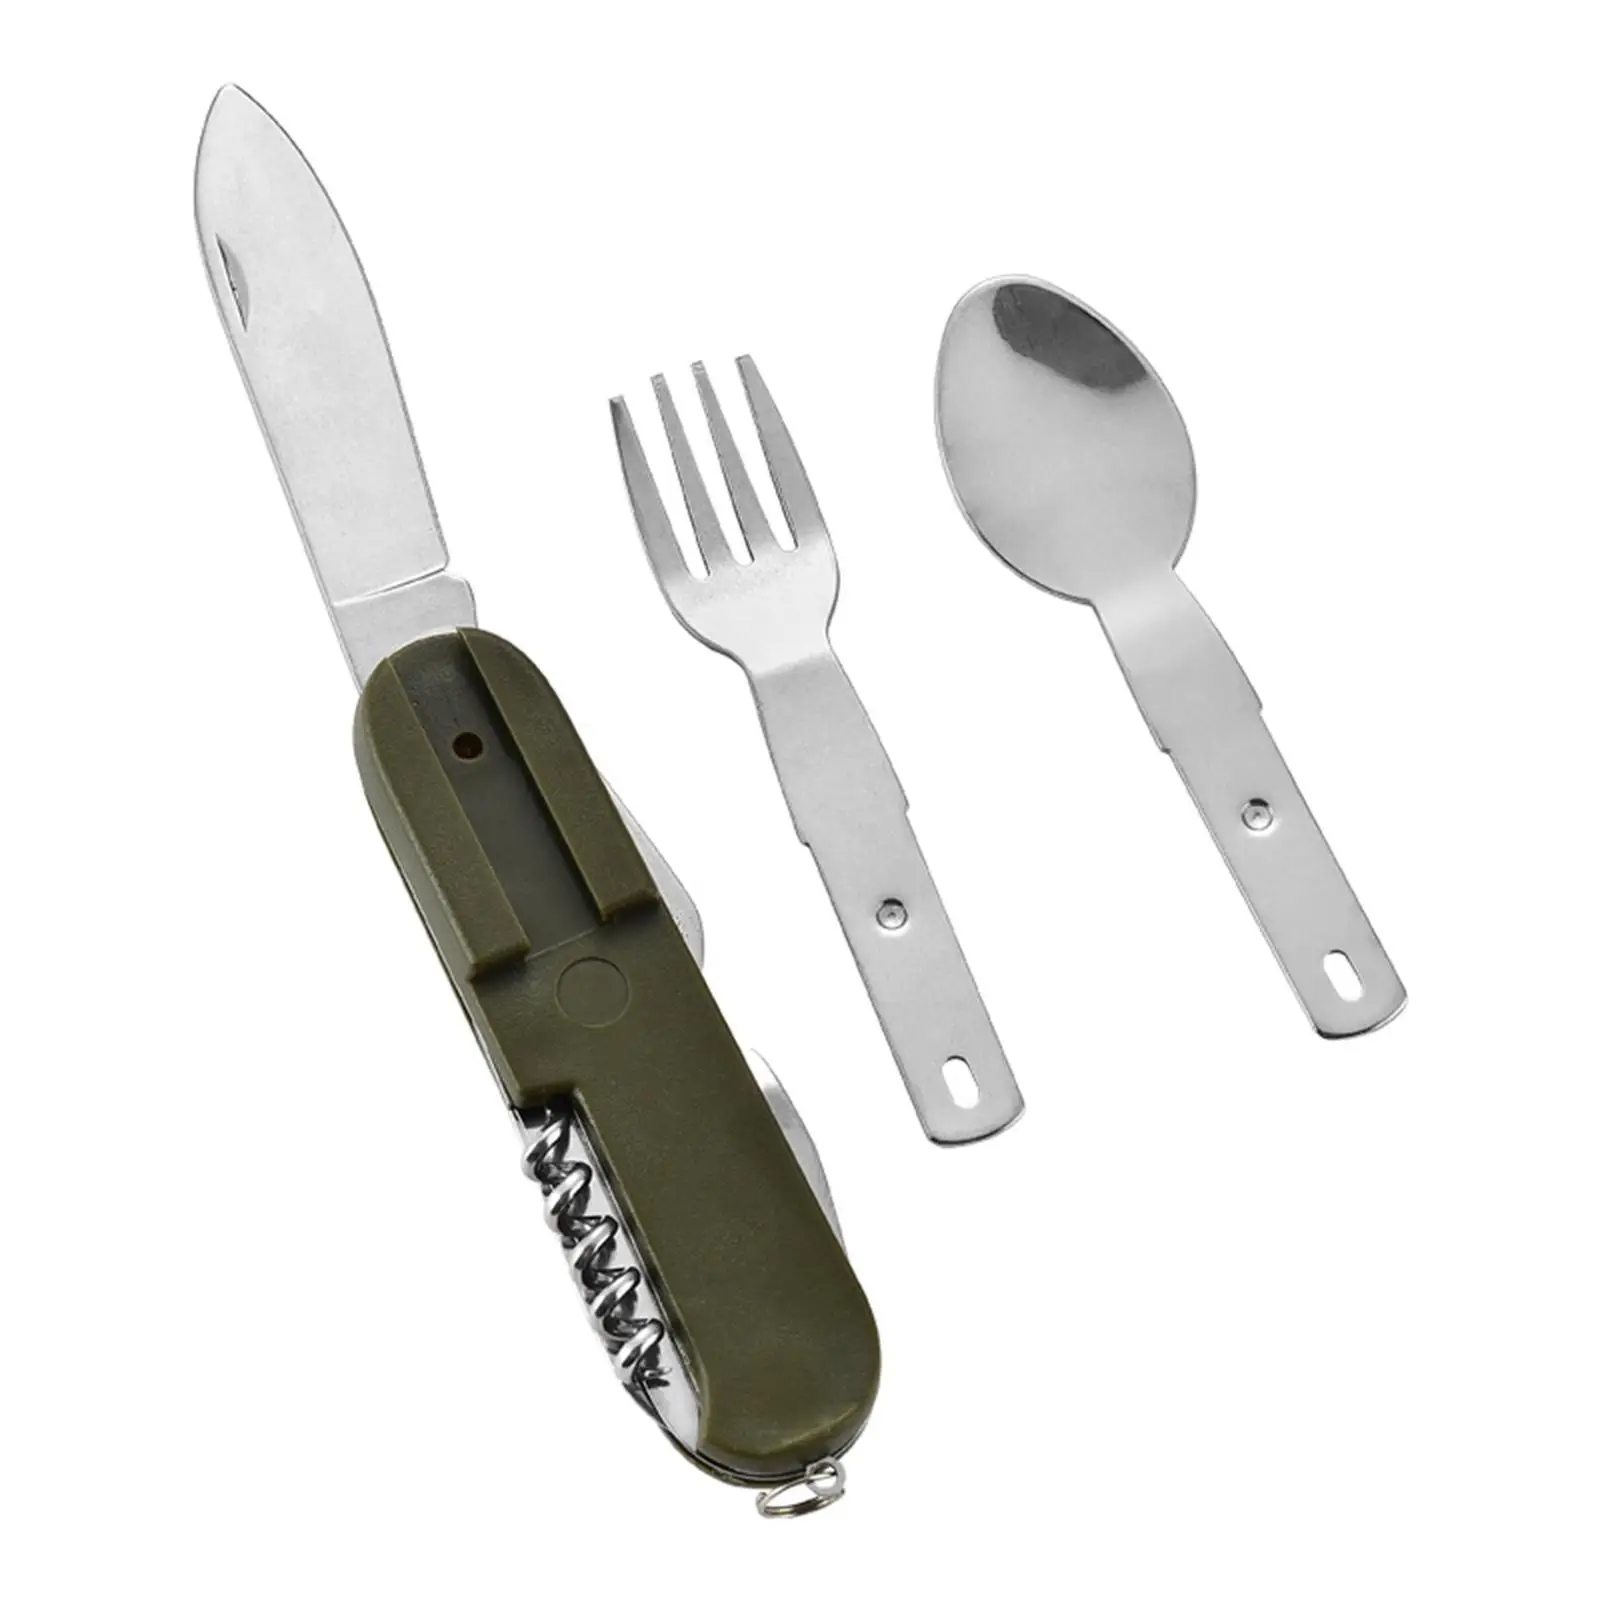 Camping Utensil Spoon, Fork, Knife & Bottle Opener Set Camping Cutlery Folding Tableware Compact Multi Tool for Hiking Traveling